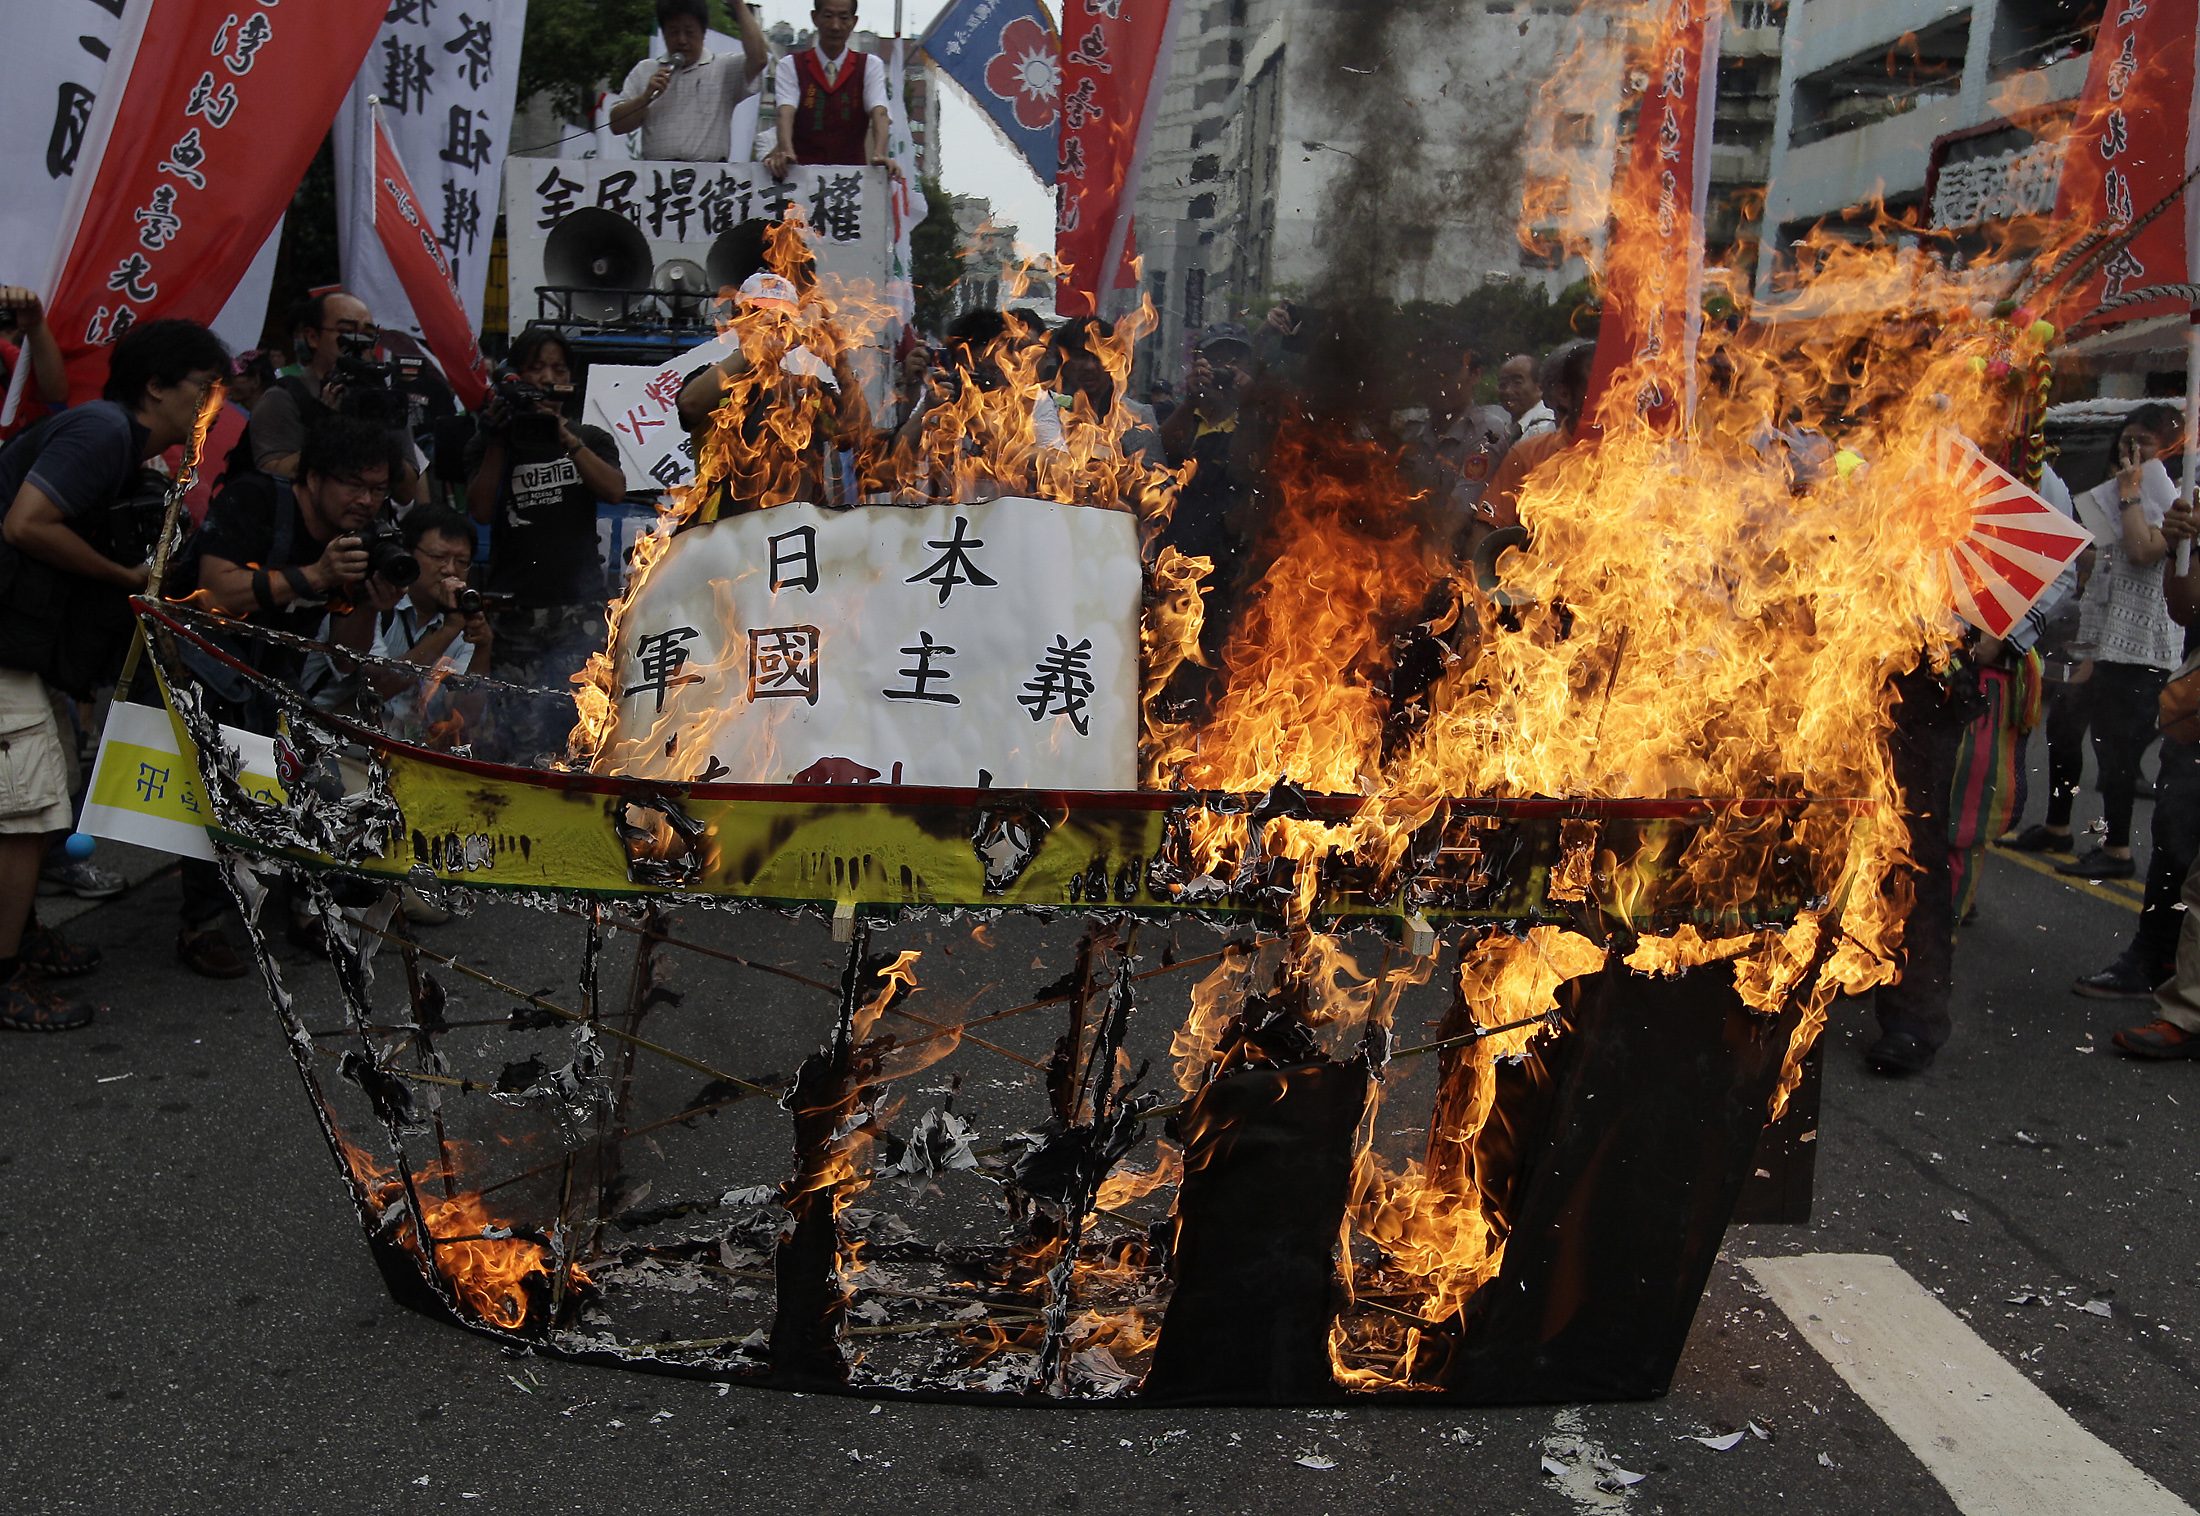 Activists burn a paper ship symbolising Japan's helicopter destroyer Izumo during an anti-Japan protest in front of the Japan Interchange Association in Taipei